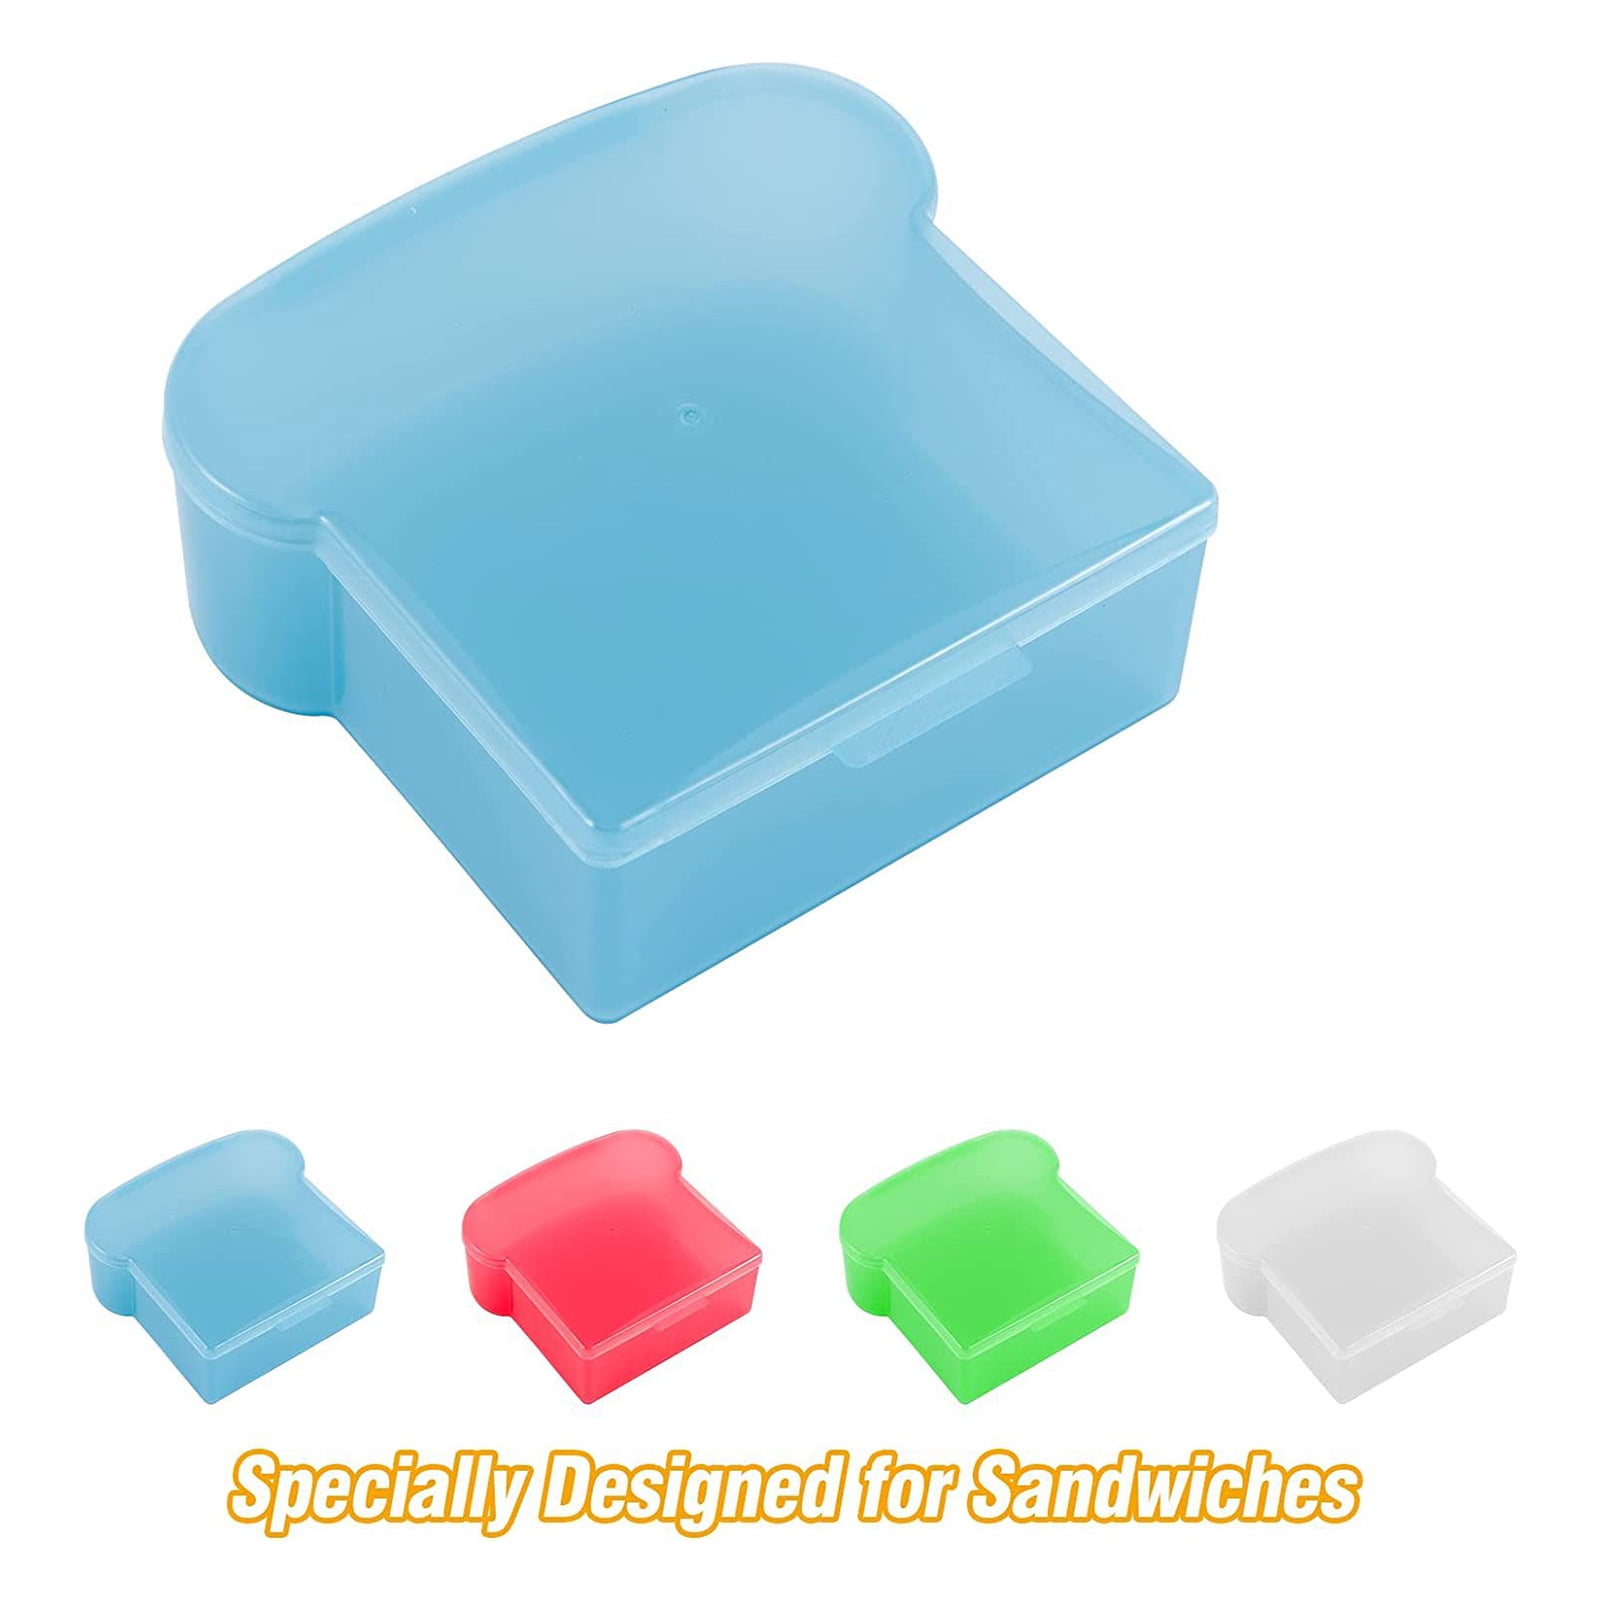 Food Storage Sandwich Containers, Toast Storage Box with Easy-locking Clips Great for Meal Prep. Kids Adult Lunch Box - Reusable, Size: 6.1 x 5.9 x